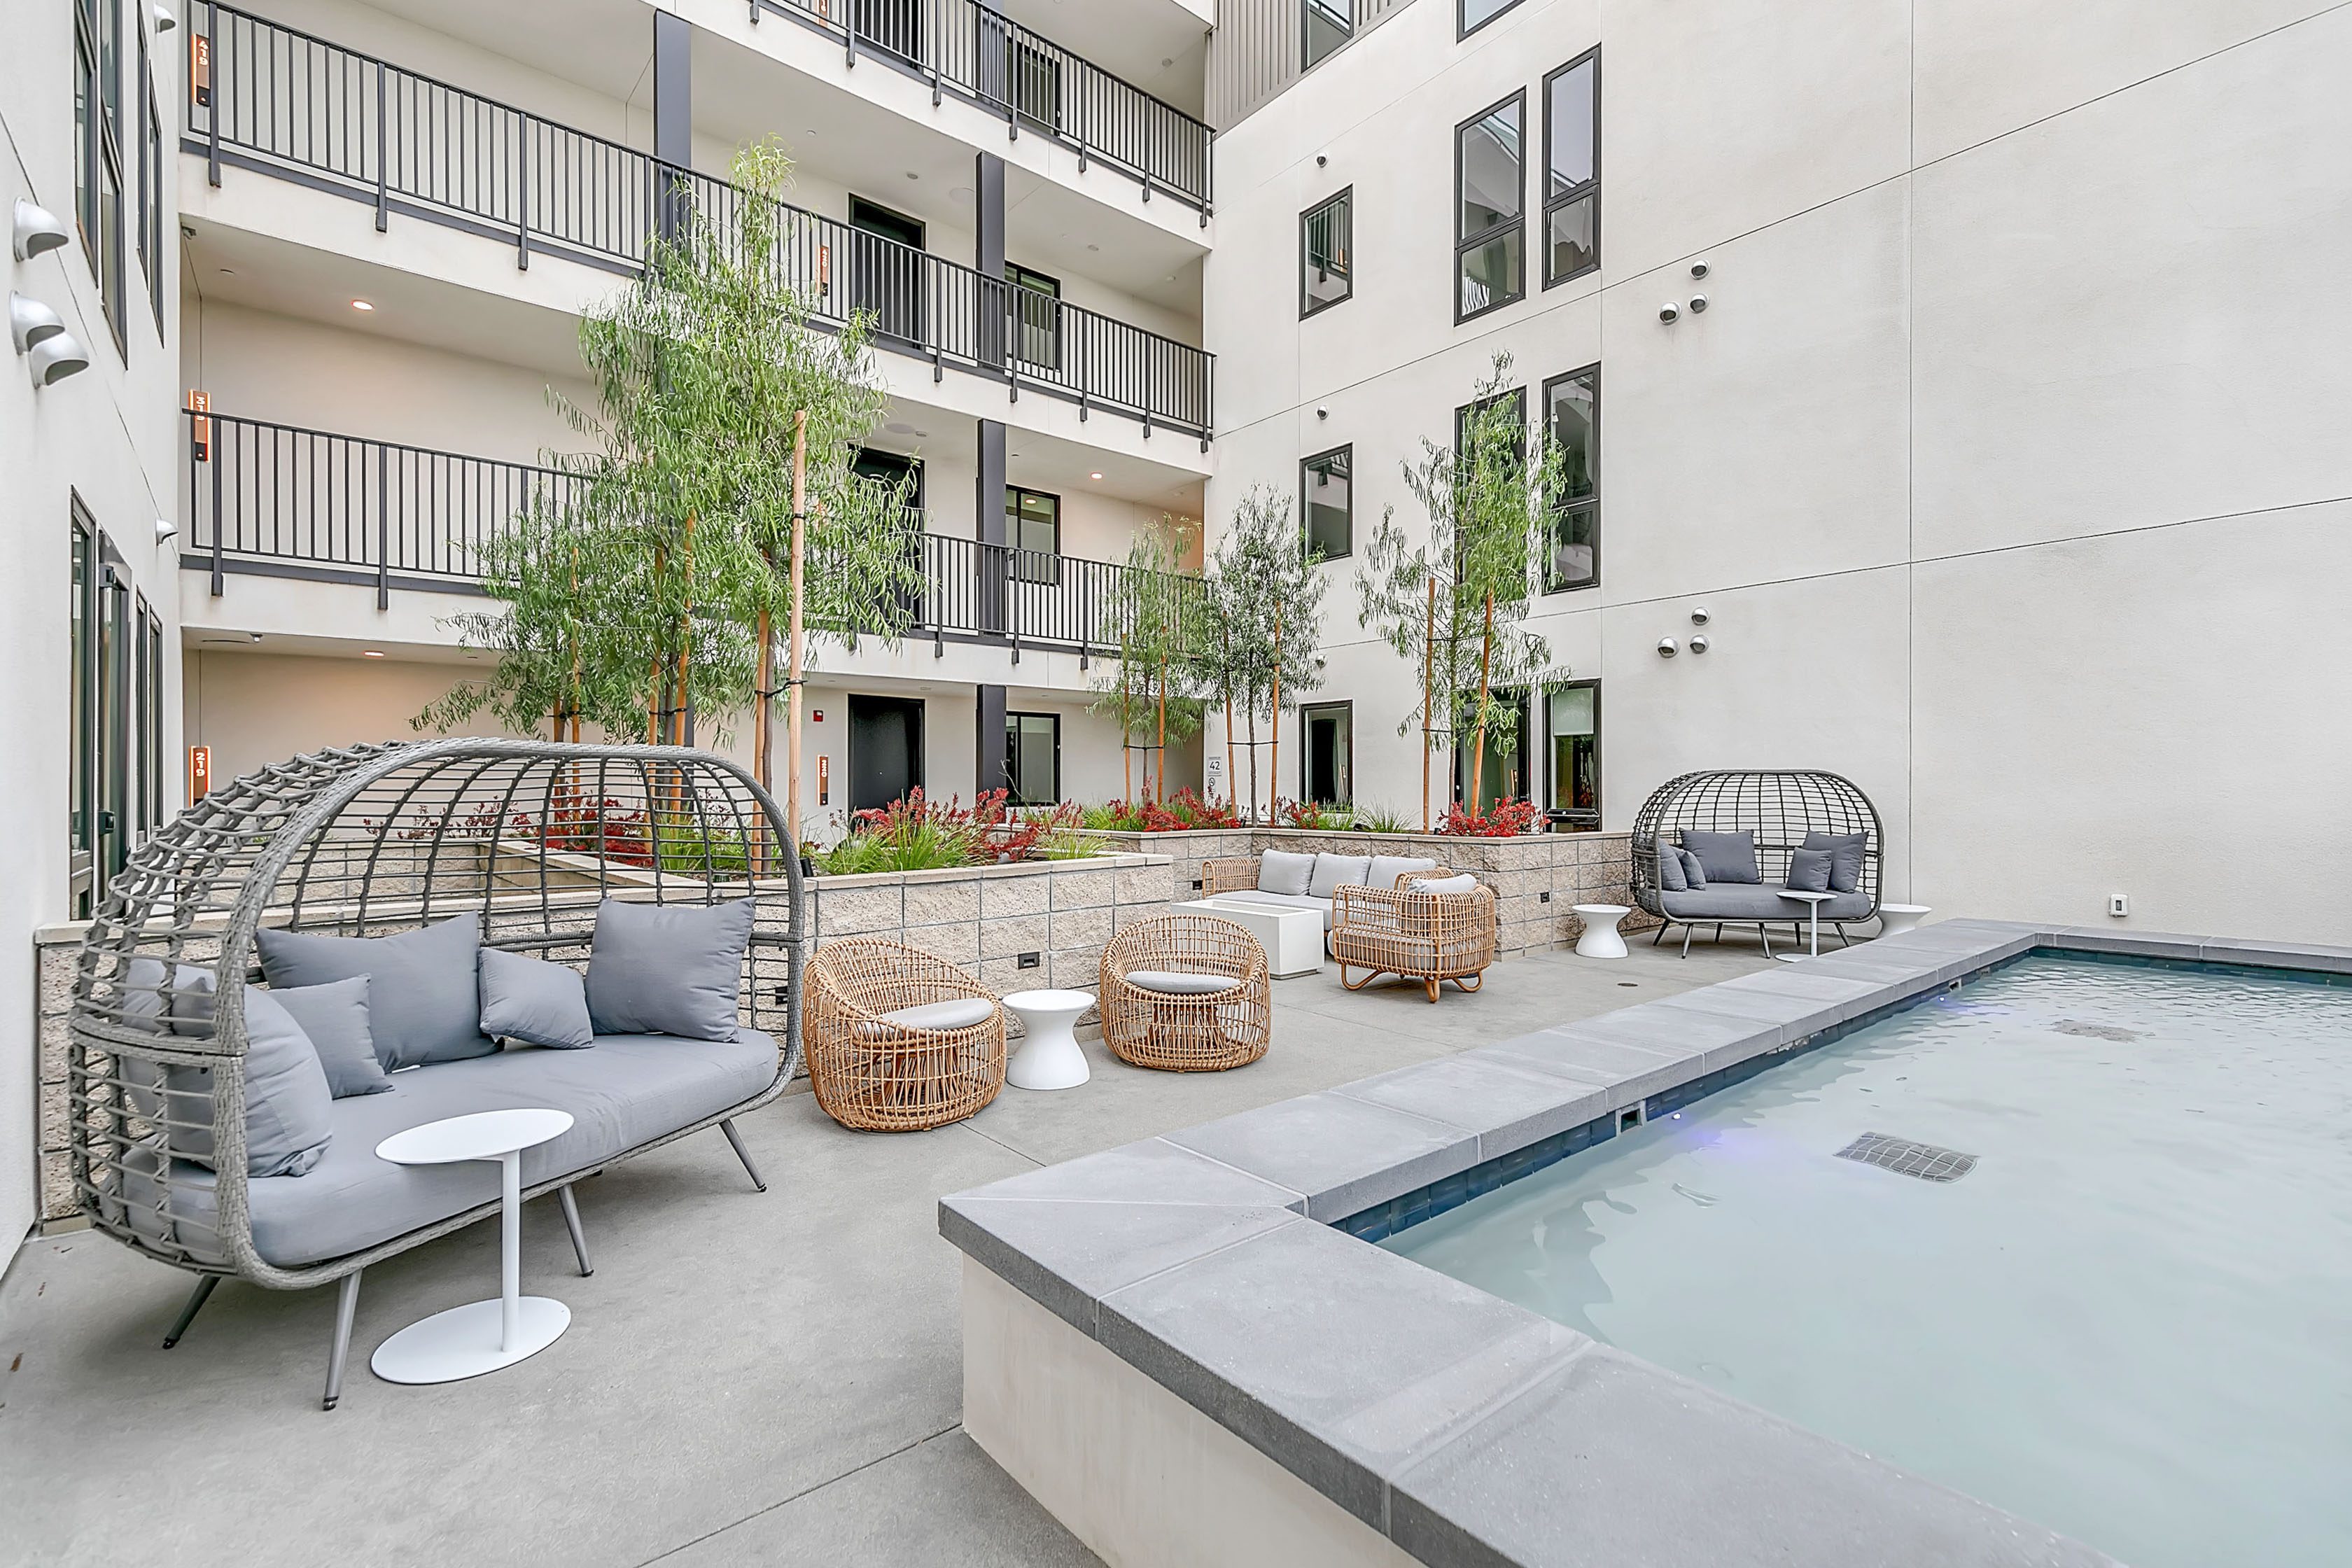 A swimming pool and lounge chairs in the courtyard of The Rinrose, an apartment building in Pasadena.